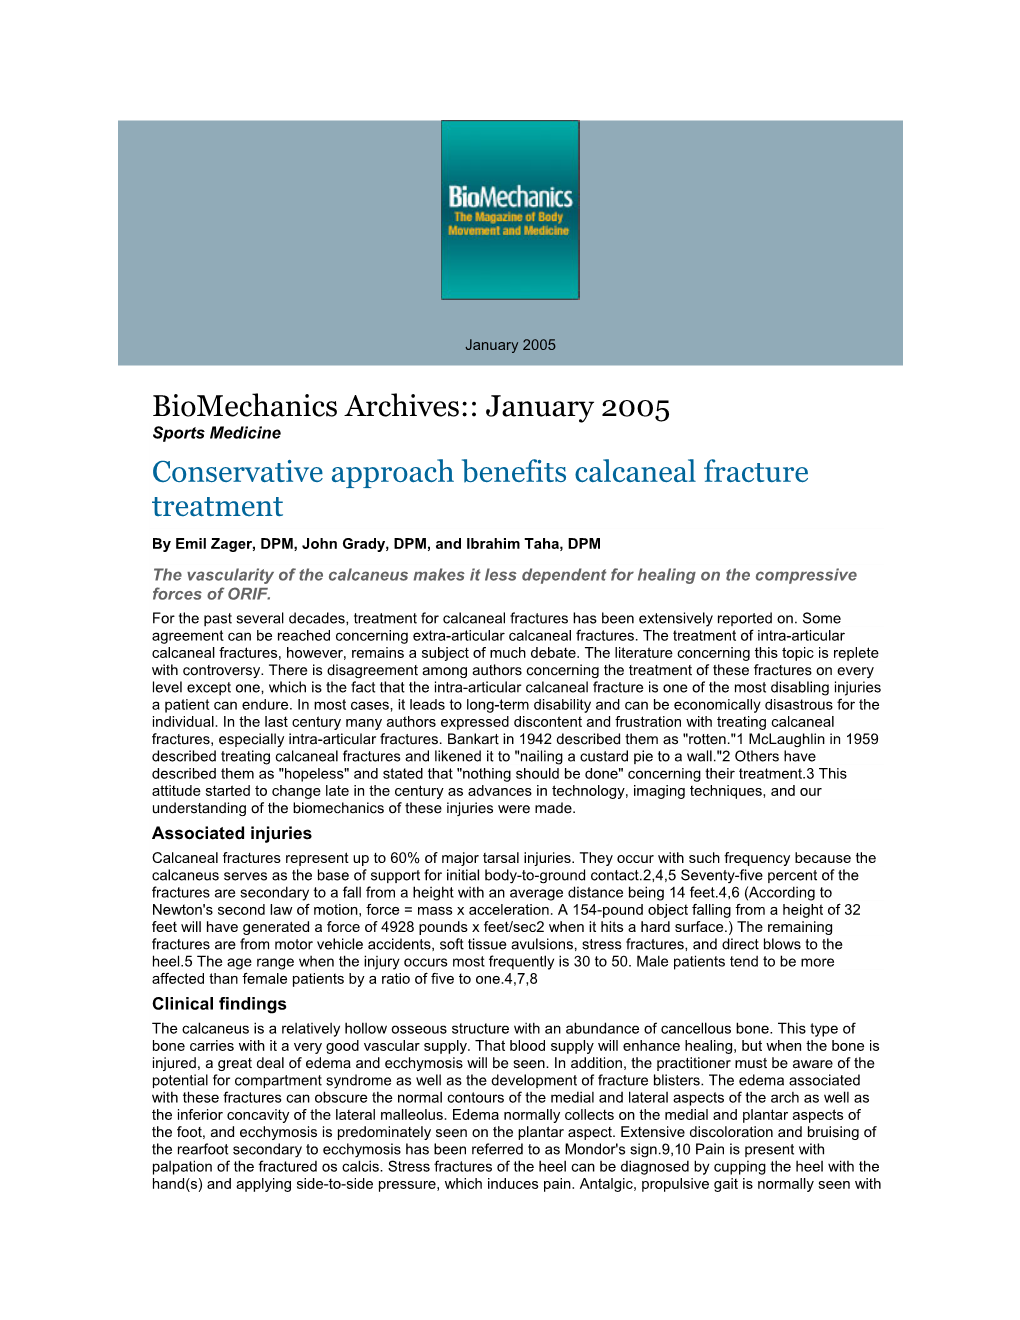 Biomechanics Archives:: January 2005 Conservative Approach Benefits Calcaneal Fracture Treatment